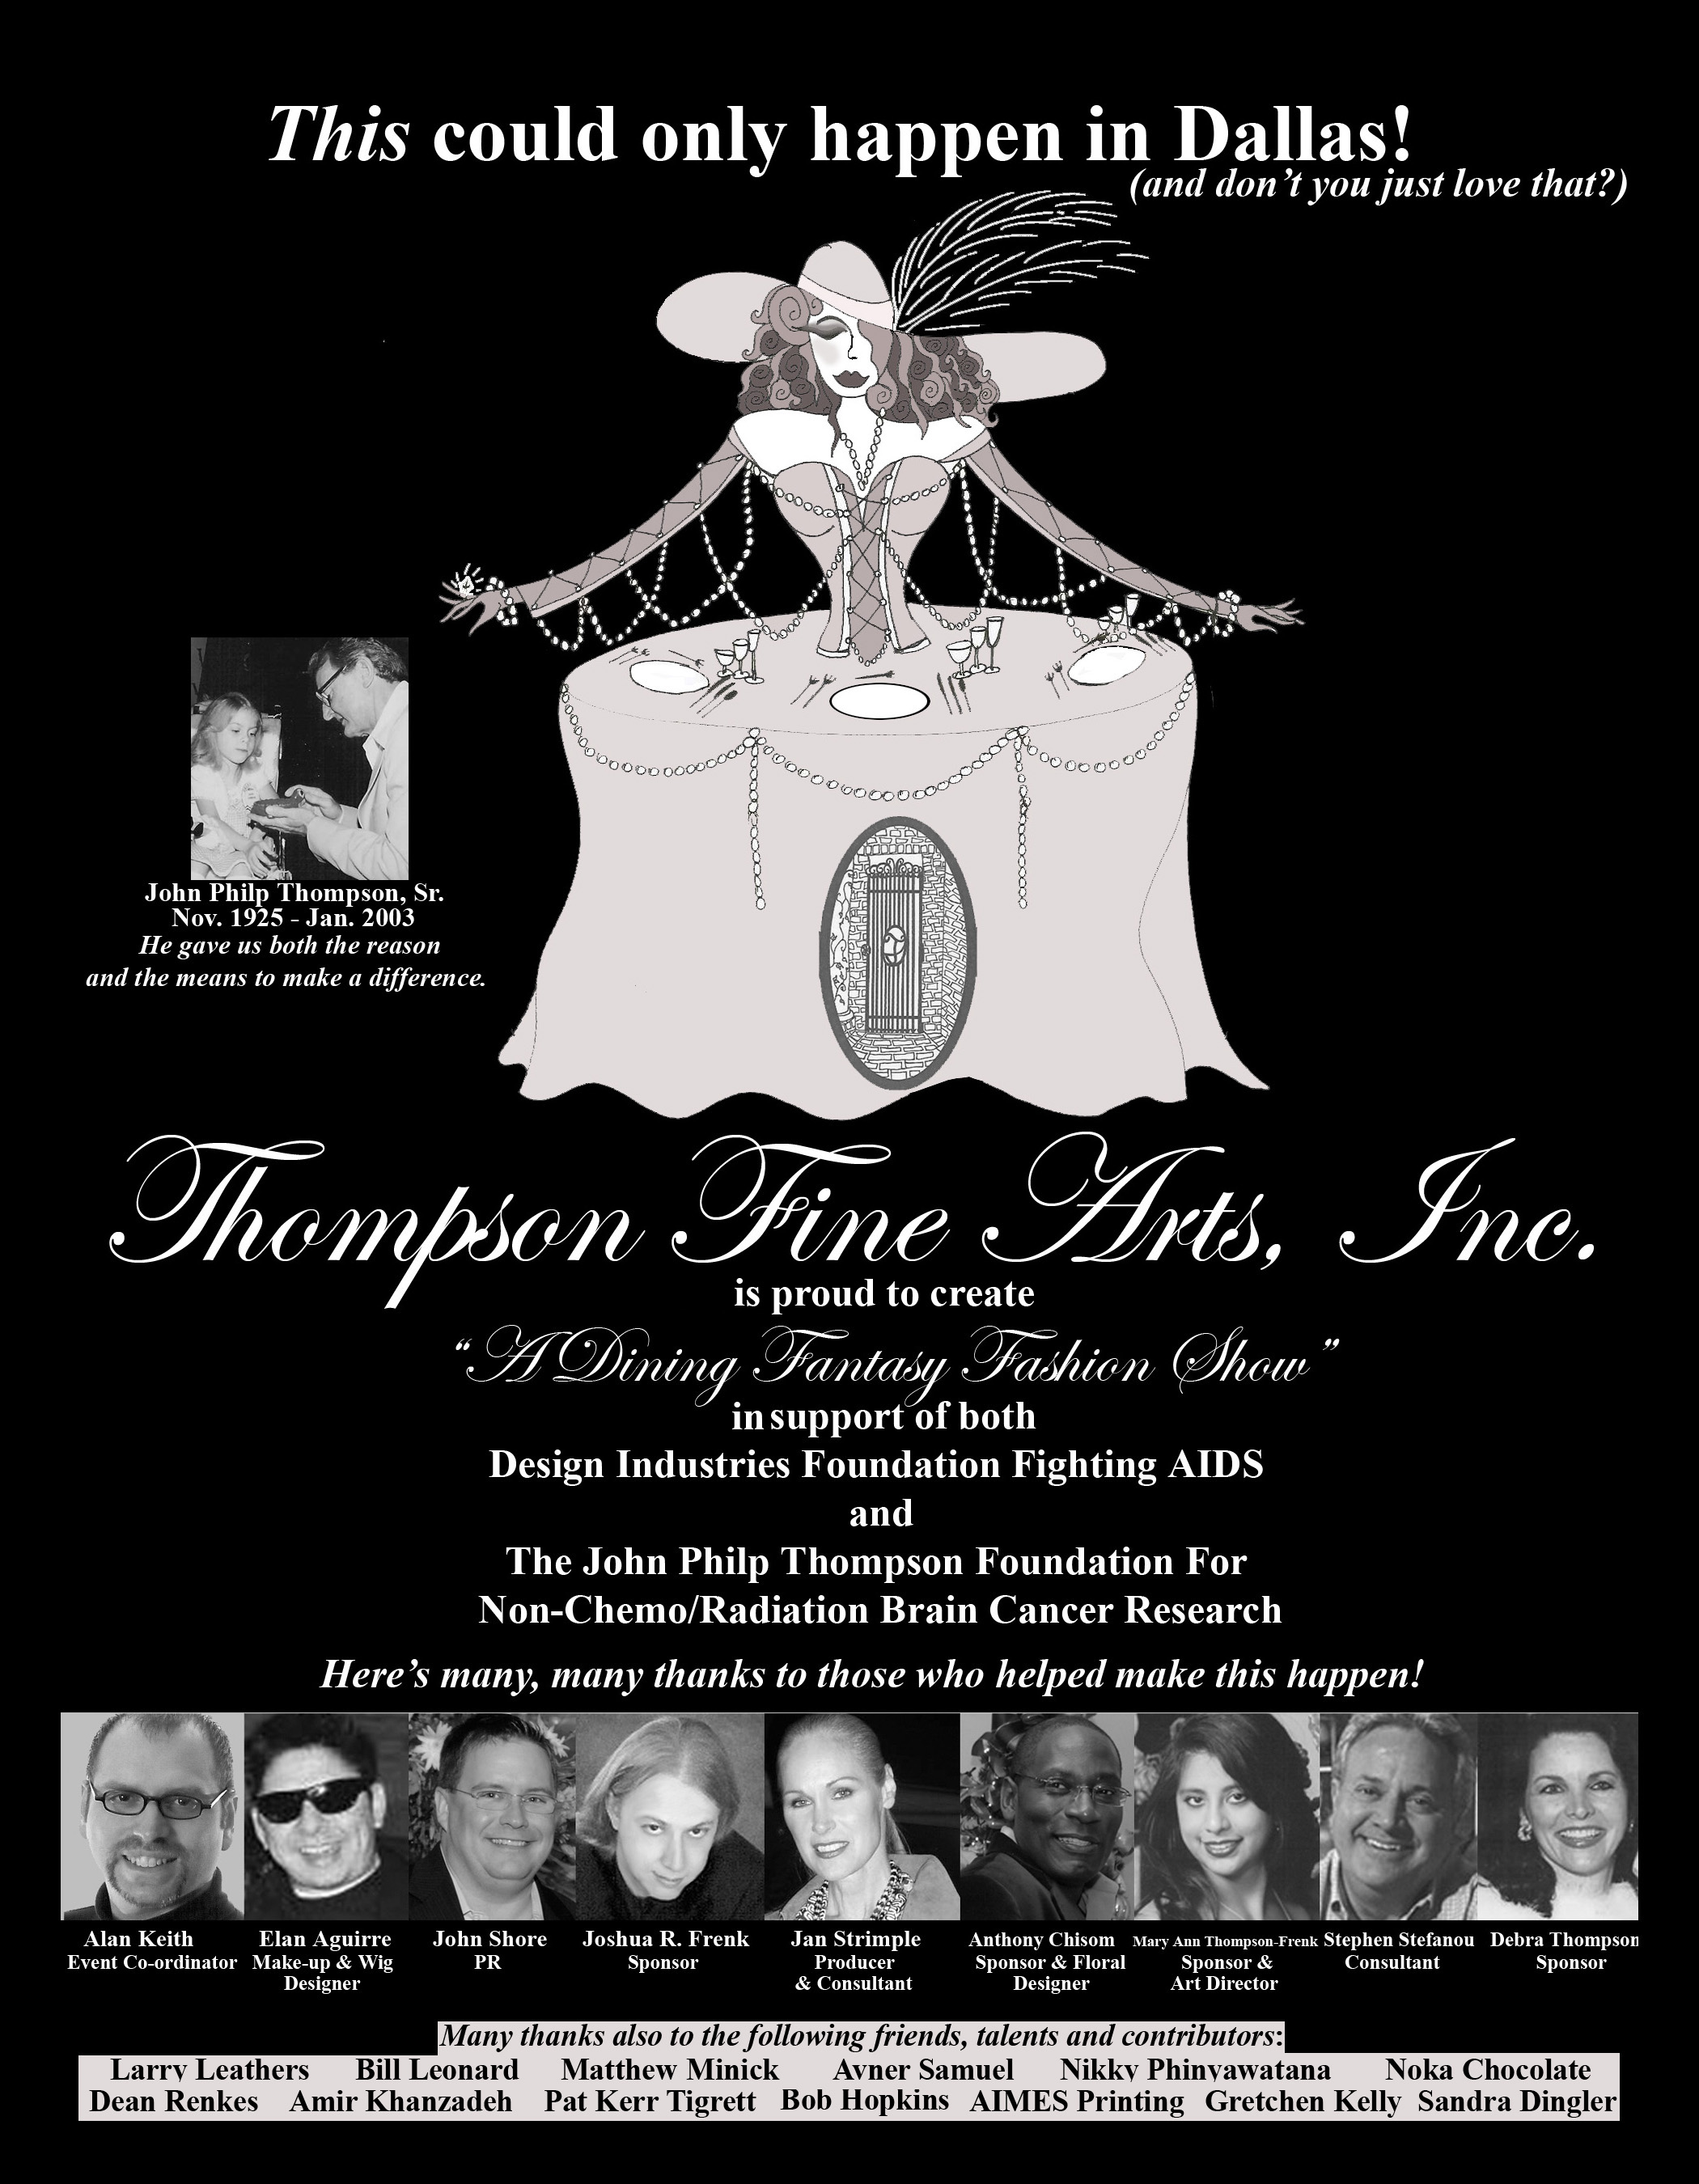 Thompson Fine Arts, Inc. is proud to create "A Dining Fantasy Fashion Show" in support of both Design Industries Foudnation Fighting AIDS and The John Philp Thompson Foundation For Non-chemo/Radiation Brain Cancer Research Here's many, many thanks to those who helped make this happen!: Alan Keith - Elan Aguirre - John Shore - Joshua R. Frenk - Jan Strimple - Anthony Chisom - Mary Ann Thompson-Frenk - Stephen Stefanou - Debra Thompson - Larry Leathers - Bill Leonard - Matthew Minick - Avner Samuel - Nikky Phinyawatana - Noka Chocolate - Dean Renkes - Amir Khanzadeh - Pat Kerr Tigrett - Bob Hopkins - AIMES Printing - Gretchen Kelly - Sandra Dingler